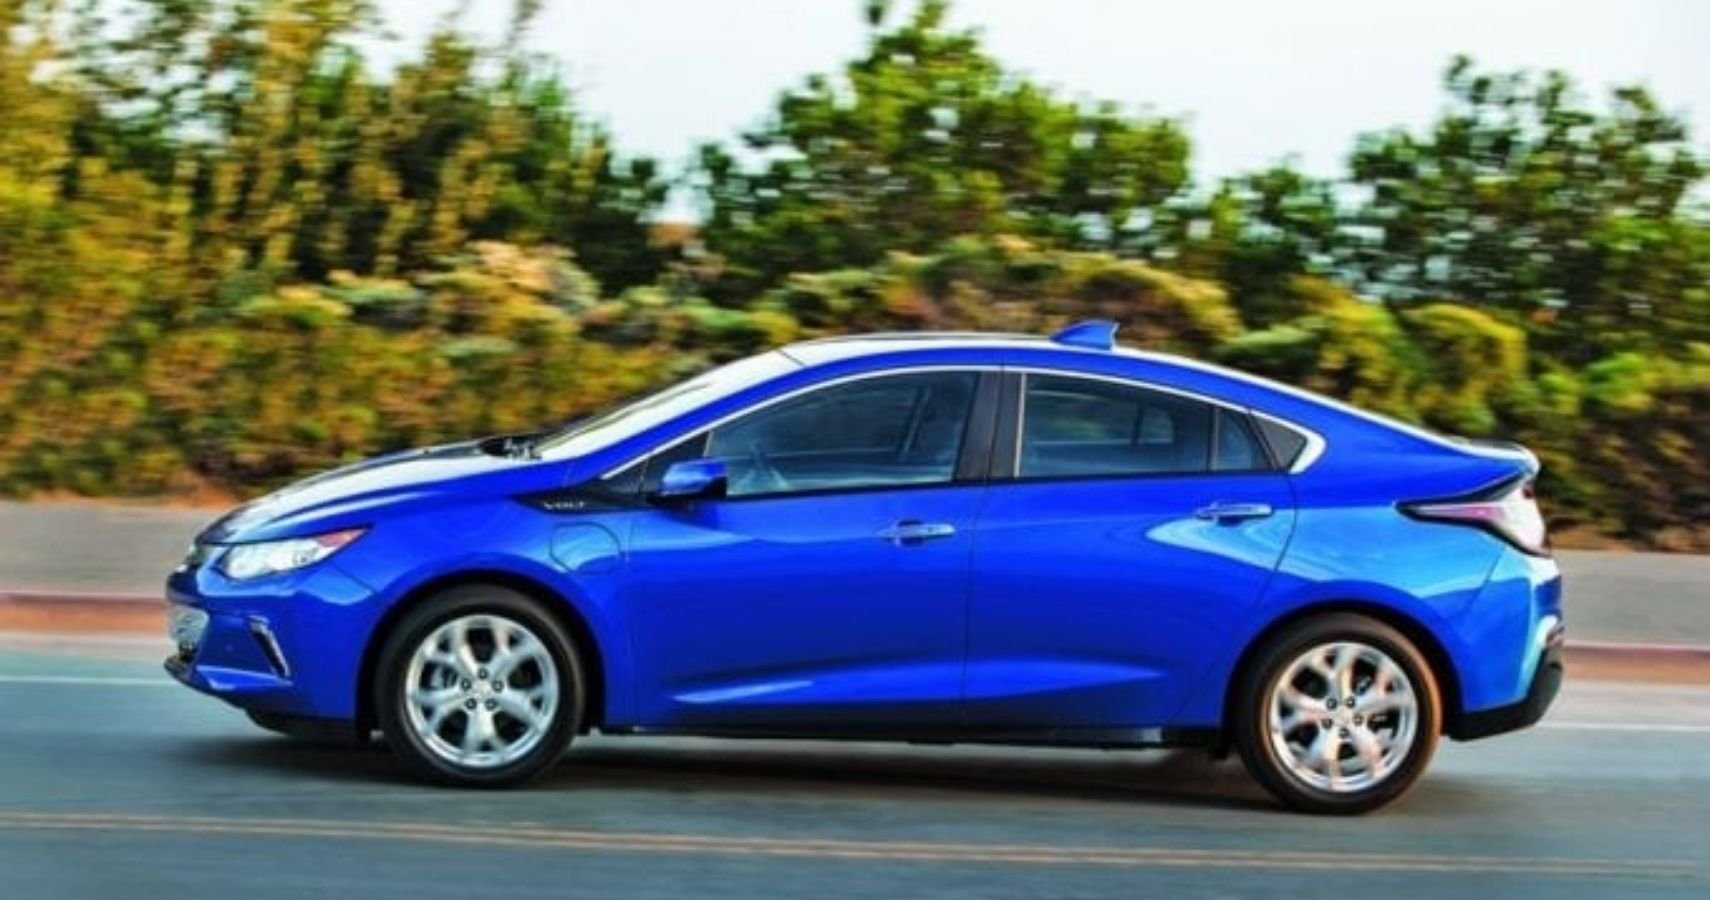 8 Reasons Why We Like The Chevy Volt (2 Reasons Why We'll Never Buy One)